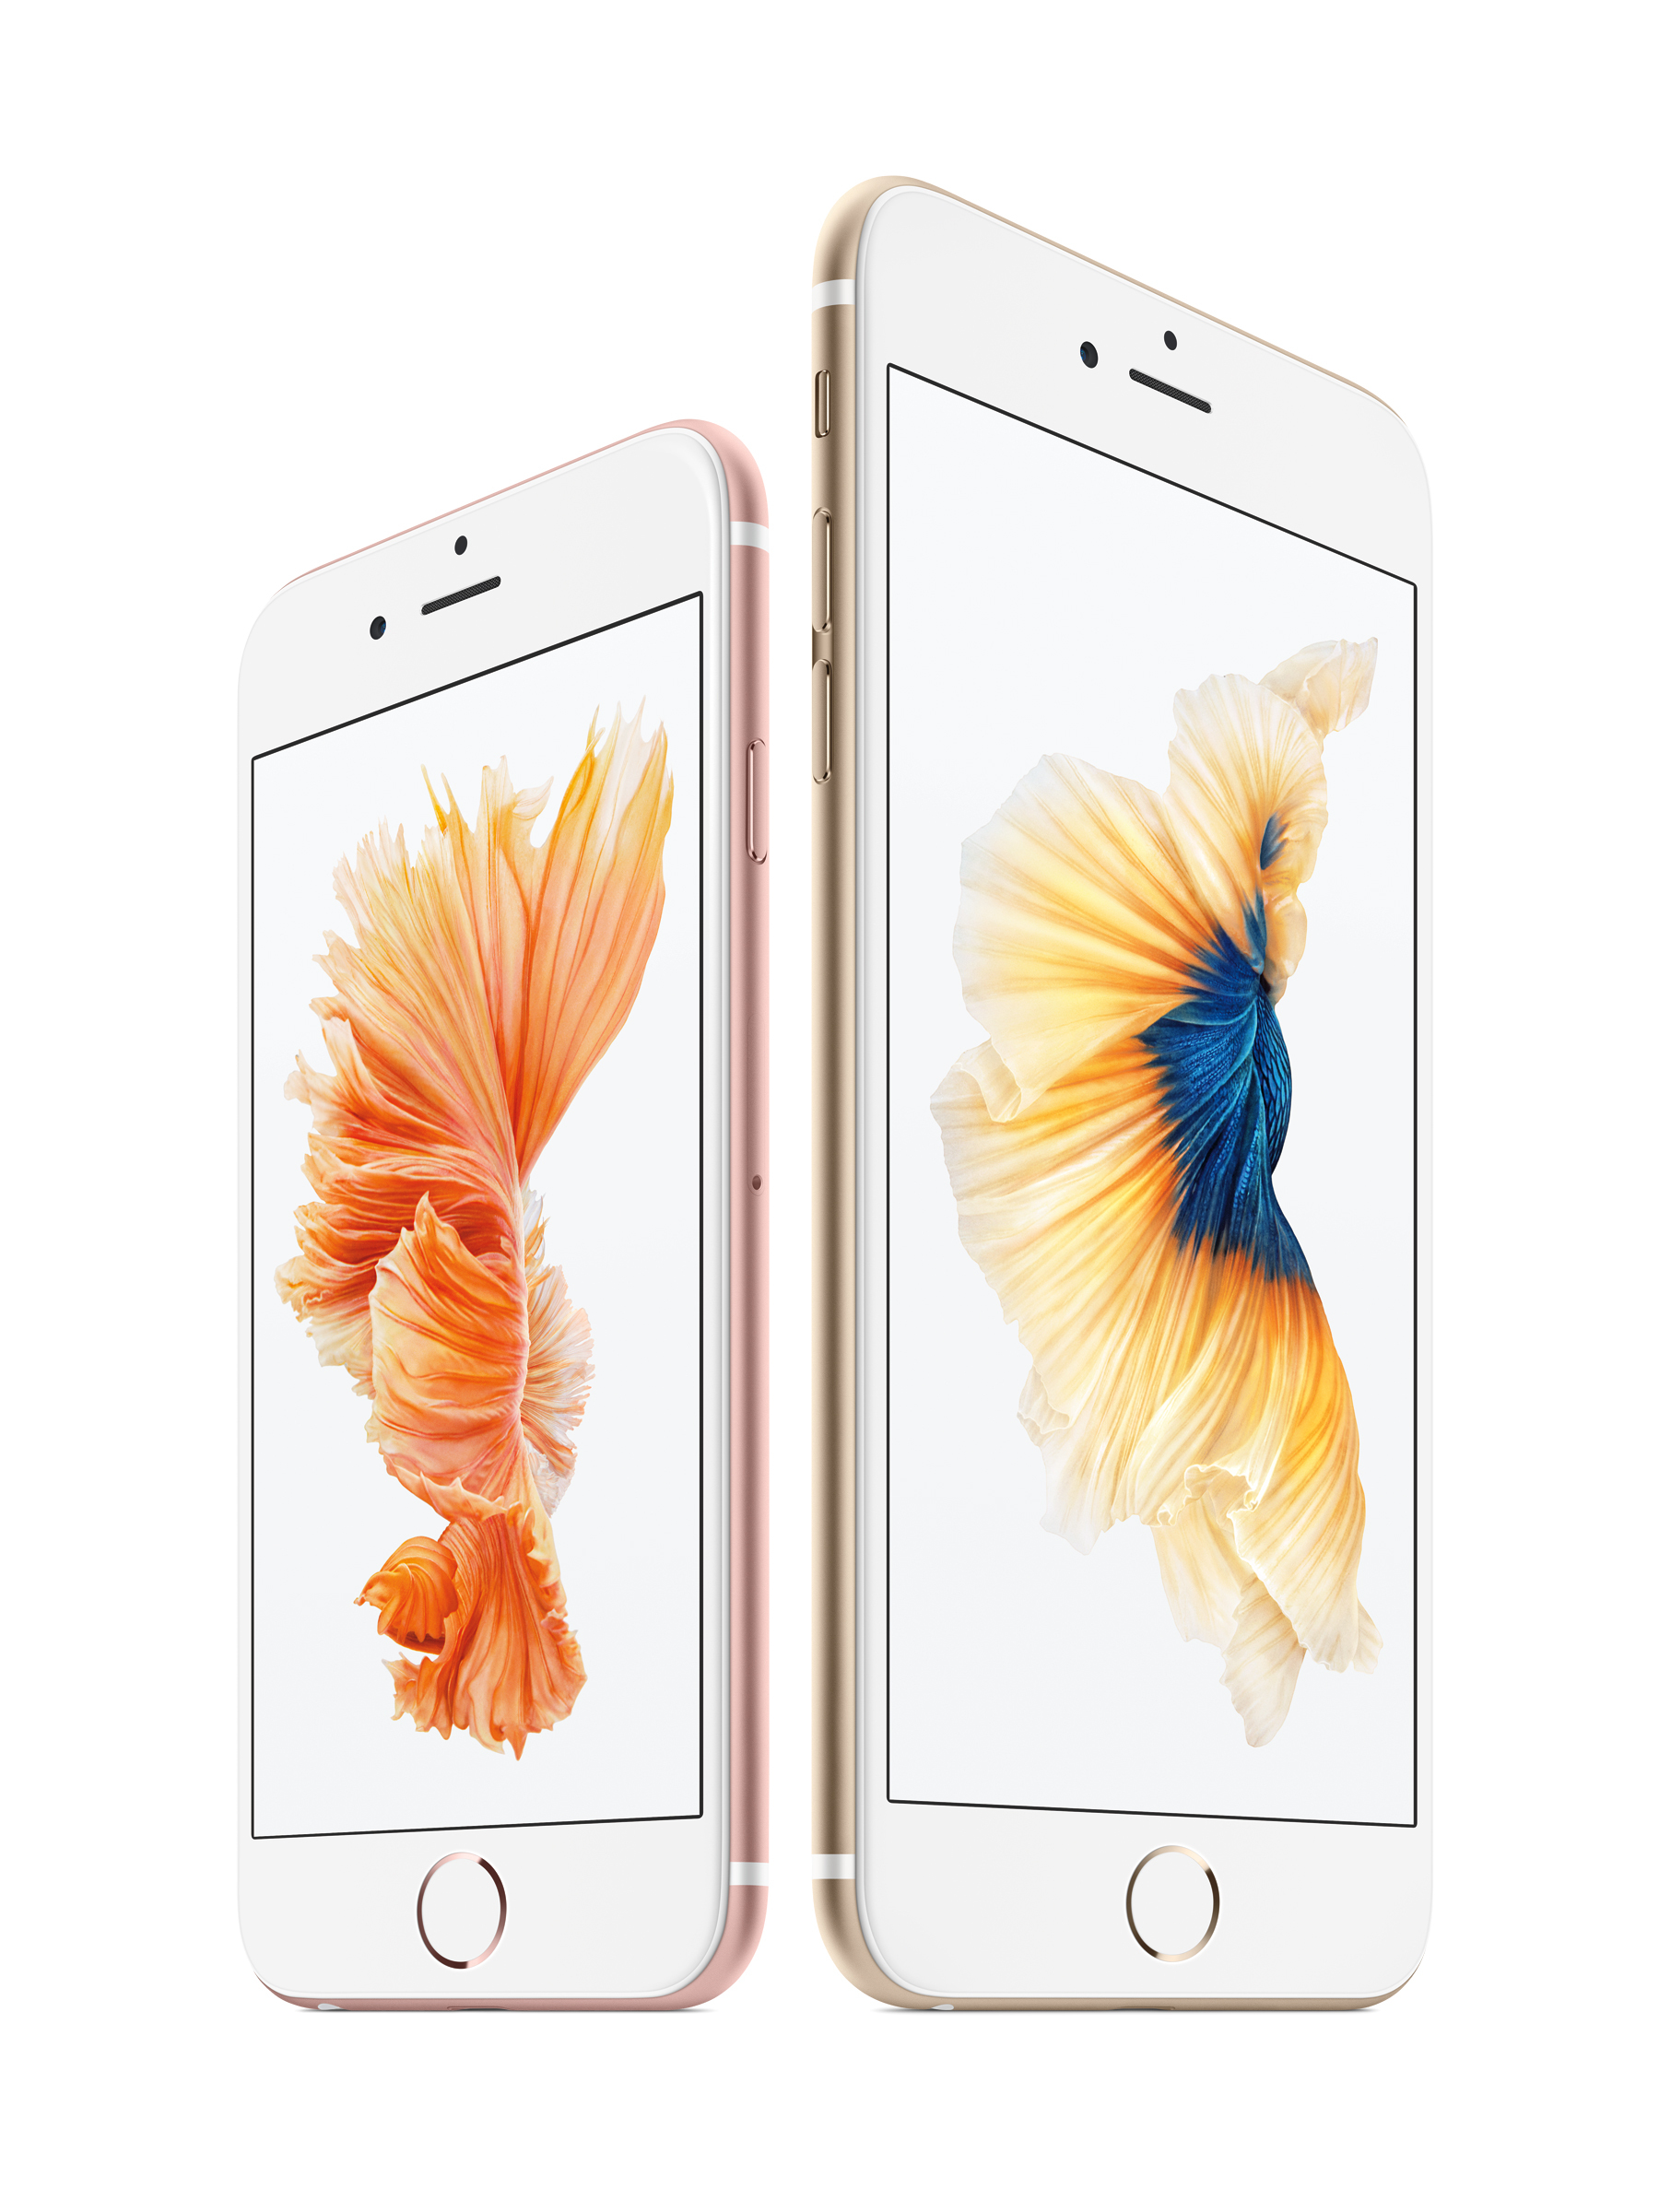 Apple Introduces Iphone 6s Iphone 6s Plus Business Wire